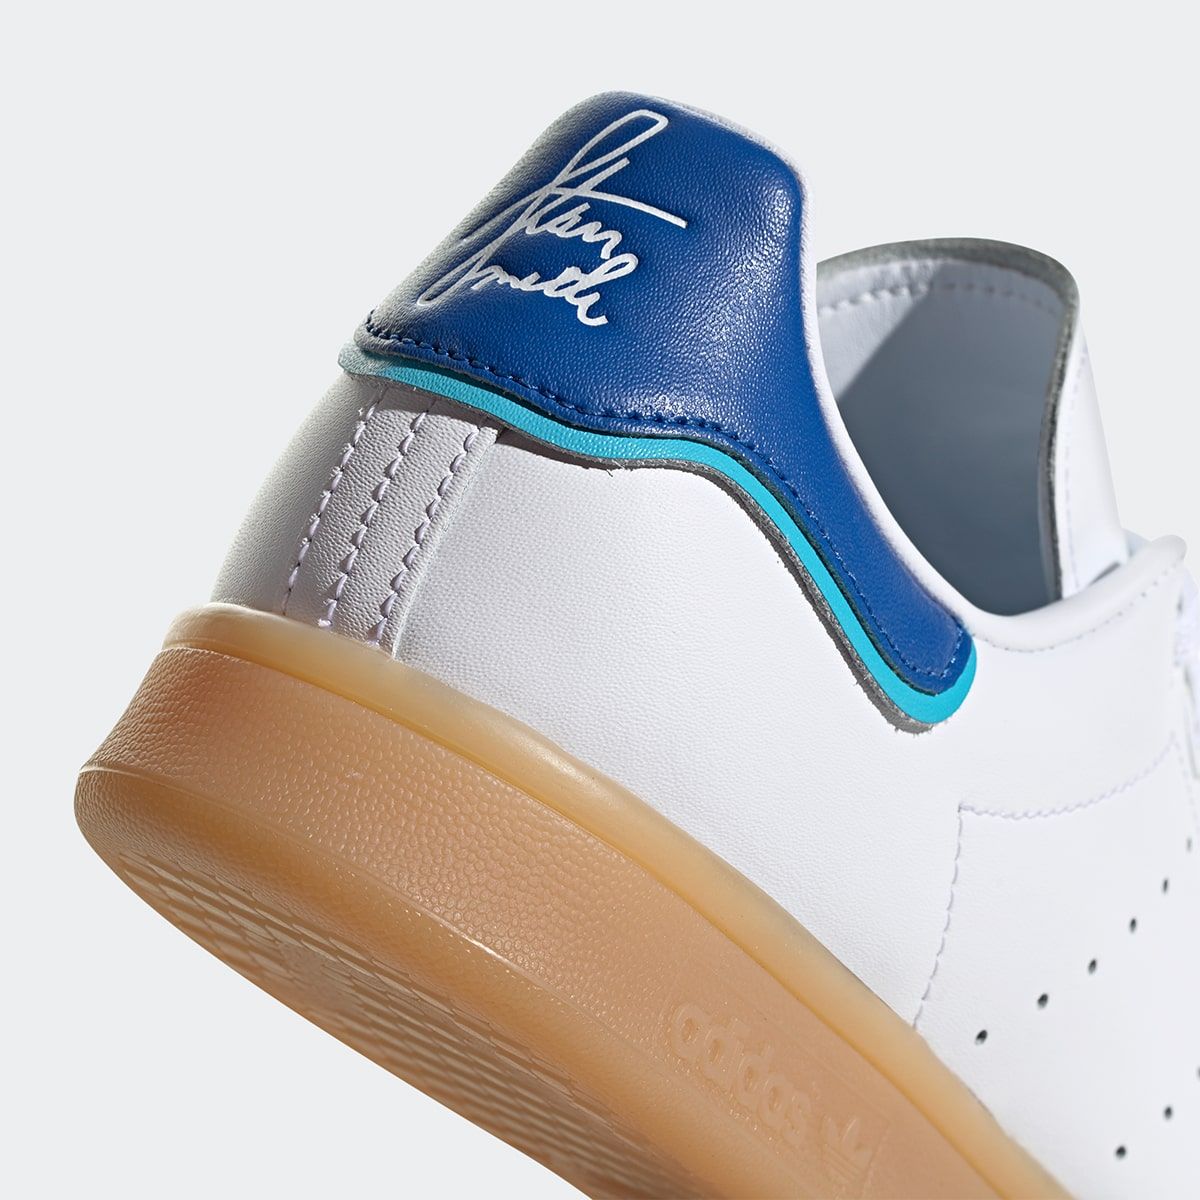 Available Now // Gum Soles and Signature Branding Hit the adidas | House of Heat°